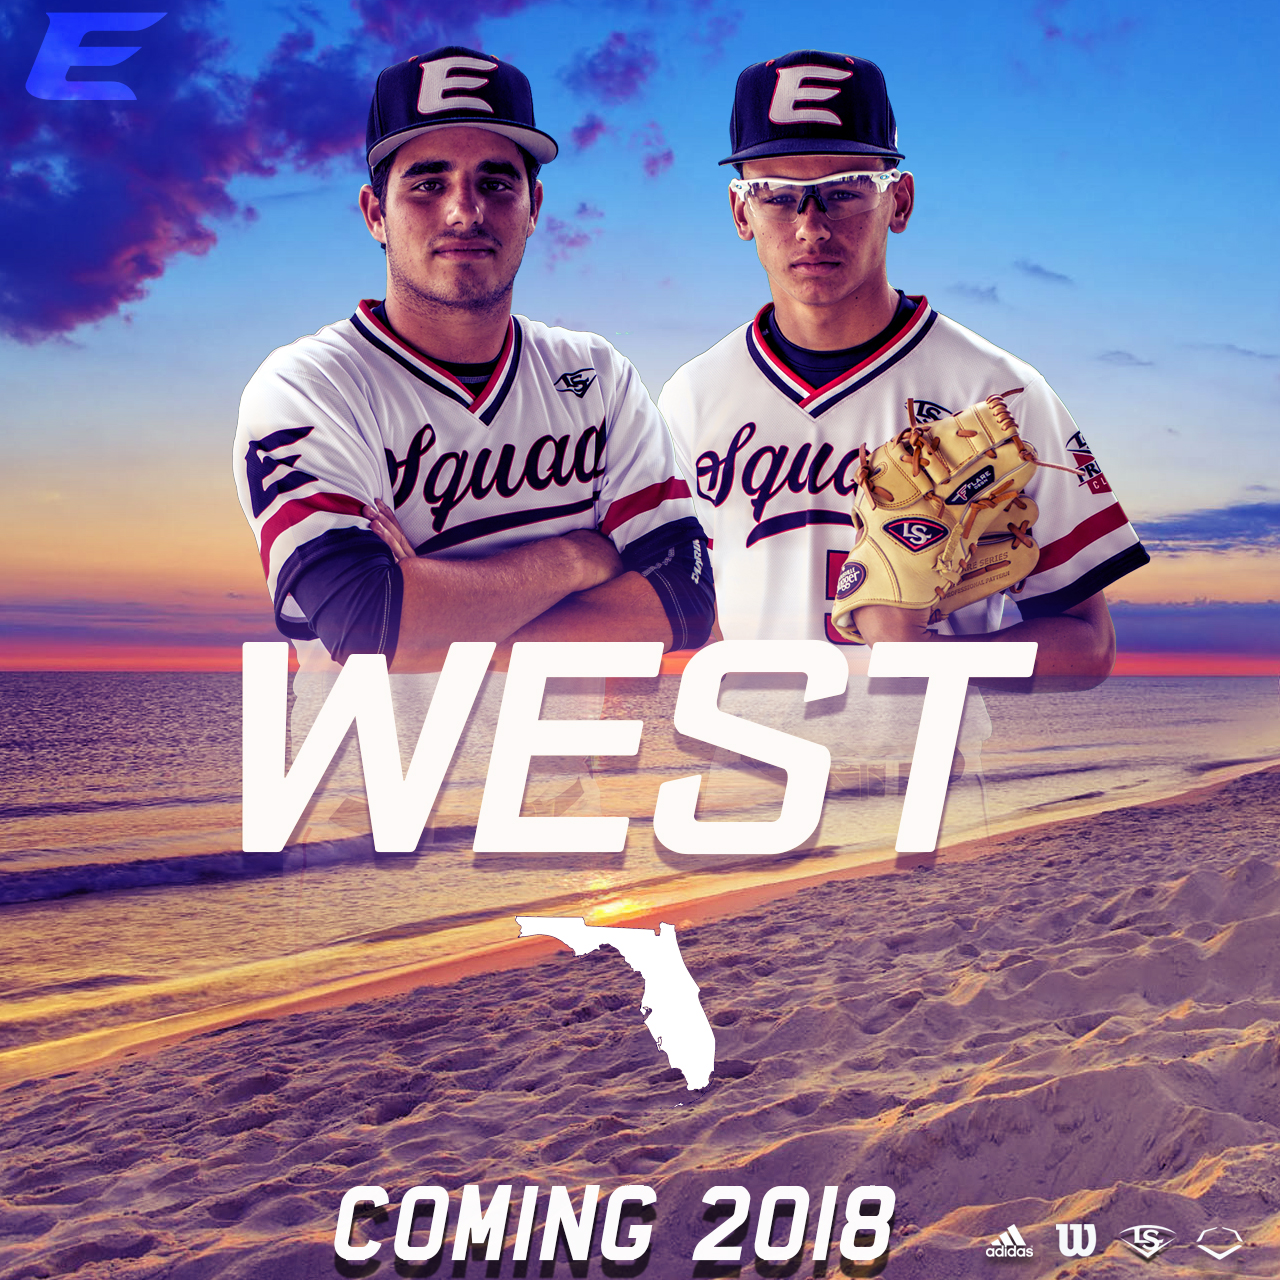 You are currently viewing Elite Squad West (Florida)